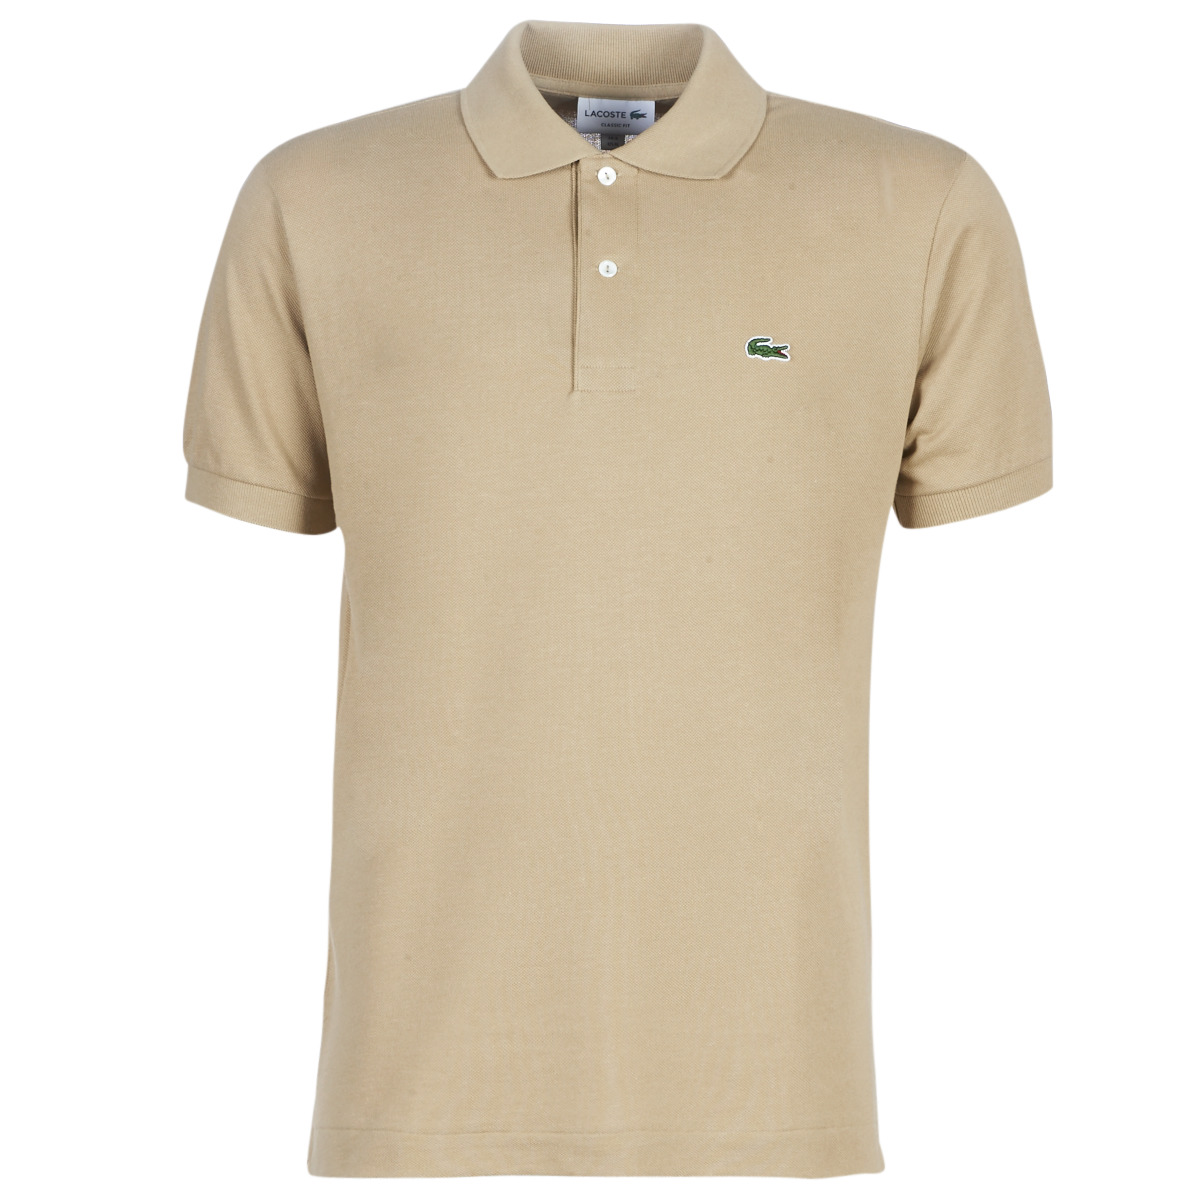 Vêtements Homme Lacoste Slip CARNABY boys's Shoes Trainers in Marine POLO L12 12 CLASSIQUE Beige